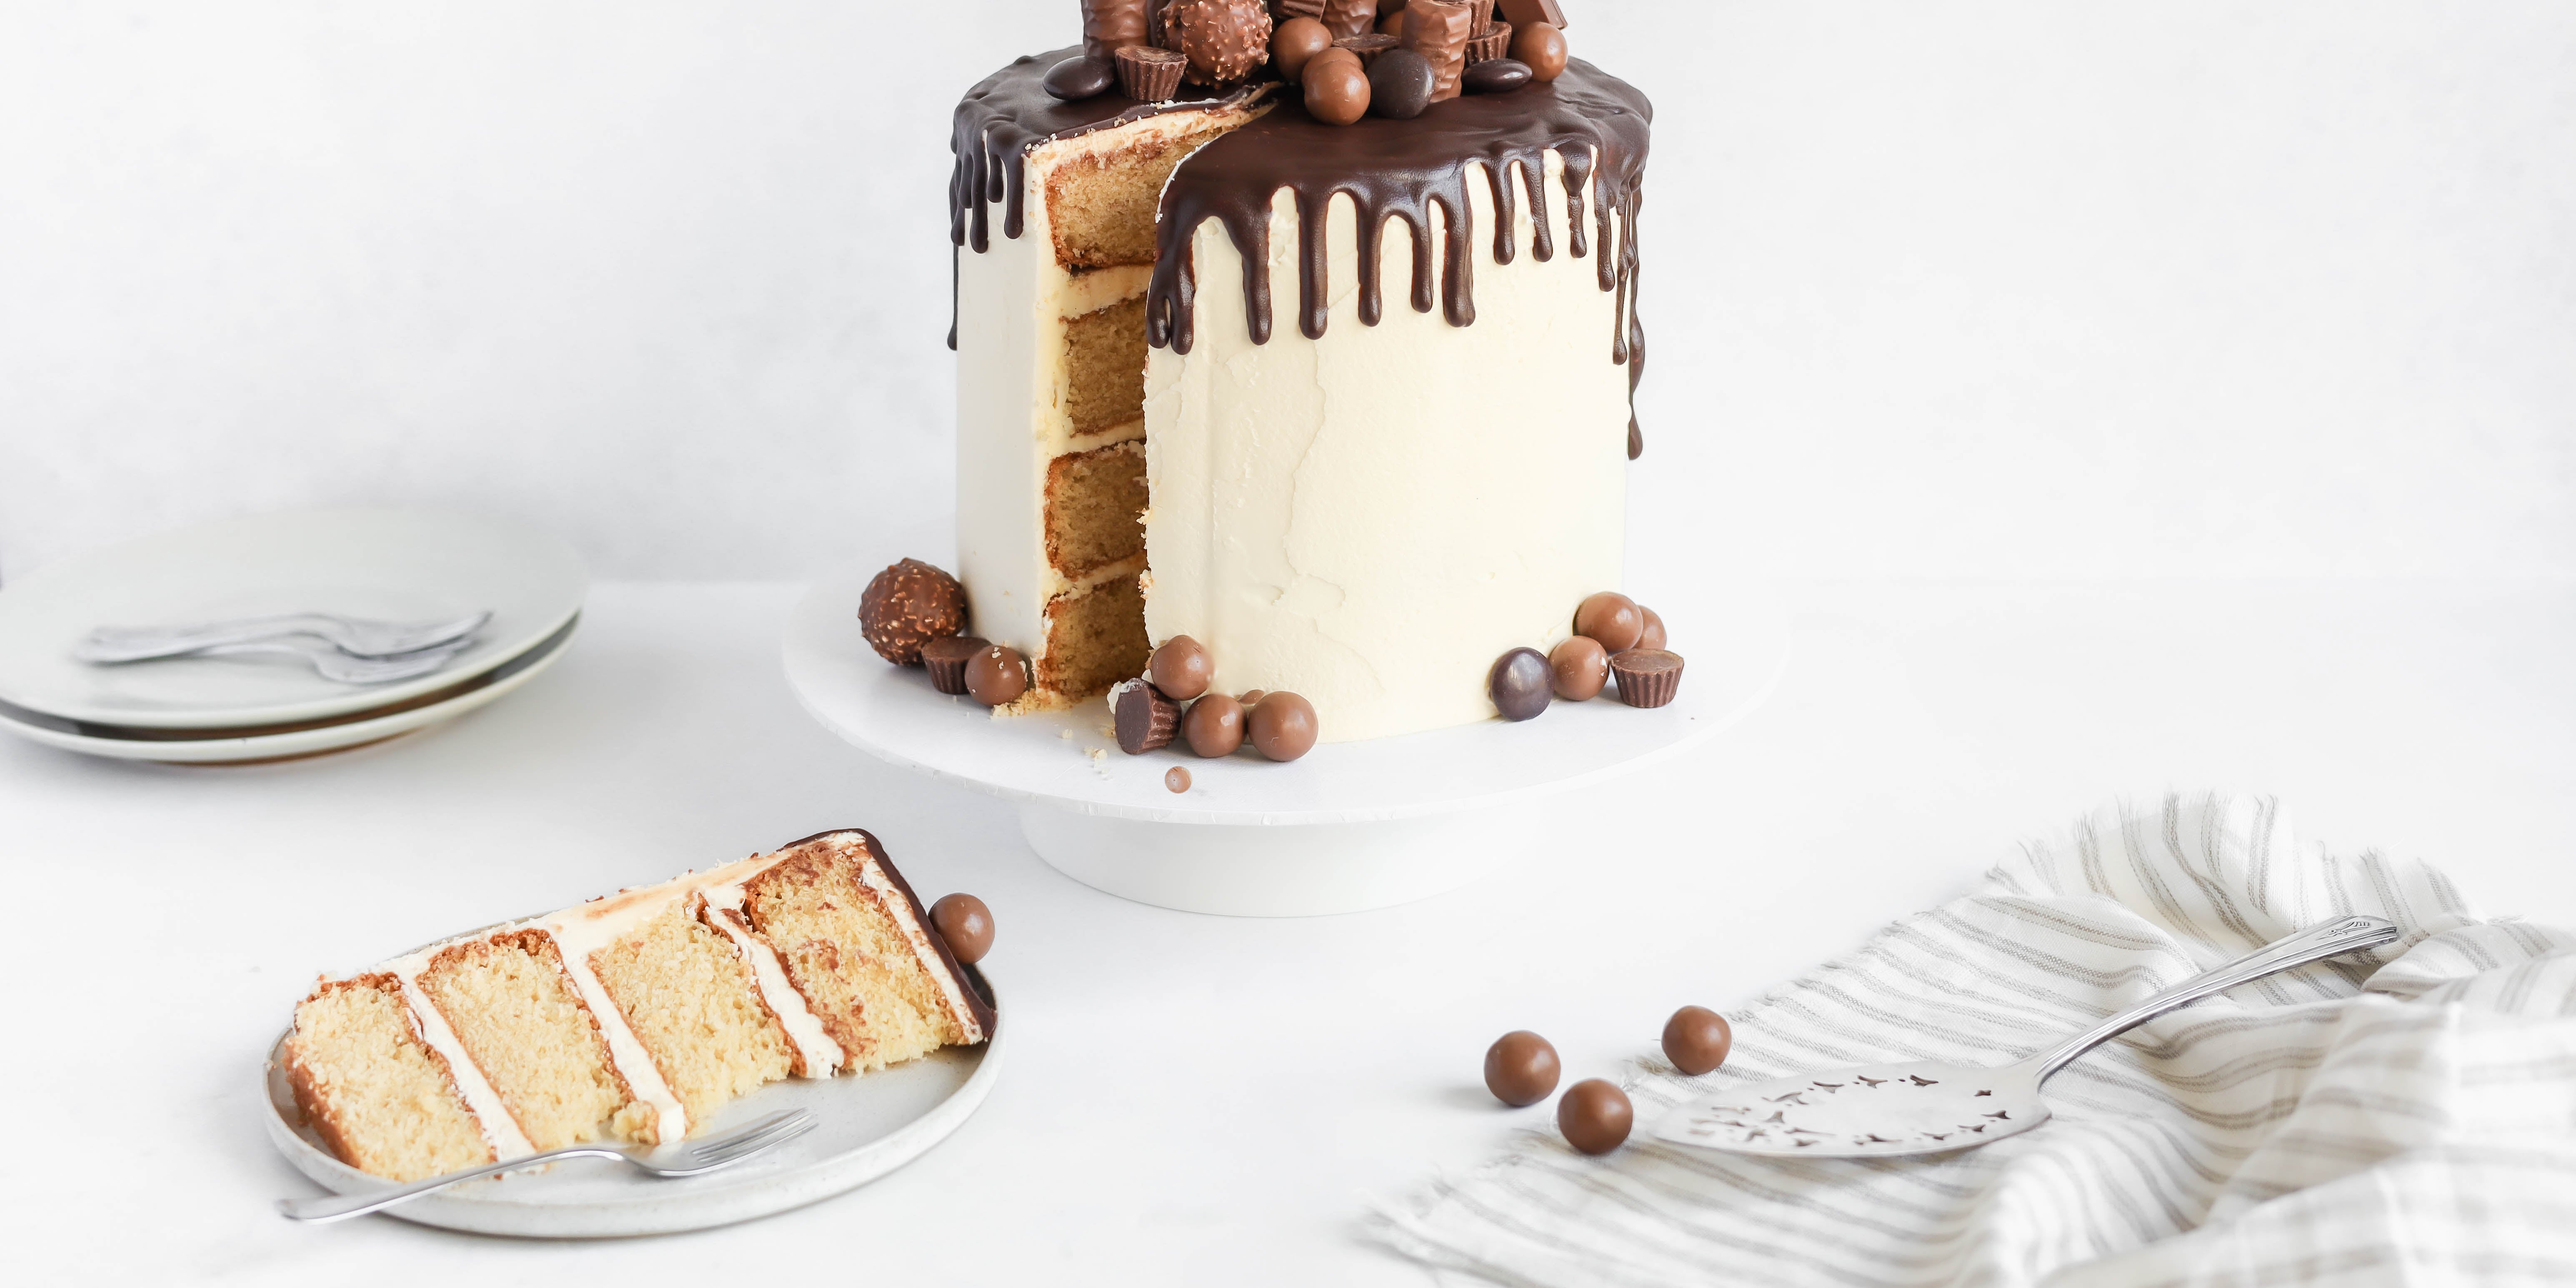 Sprinkle Drip Cake | Truffles Bakers & Confectioners LTD